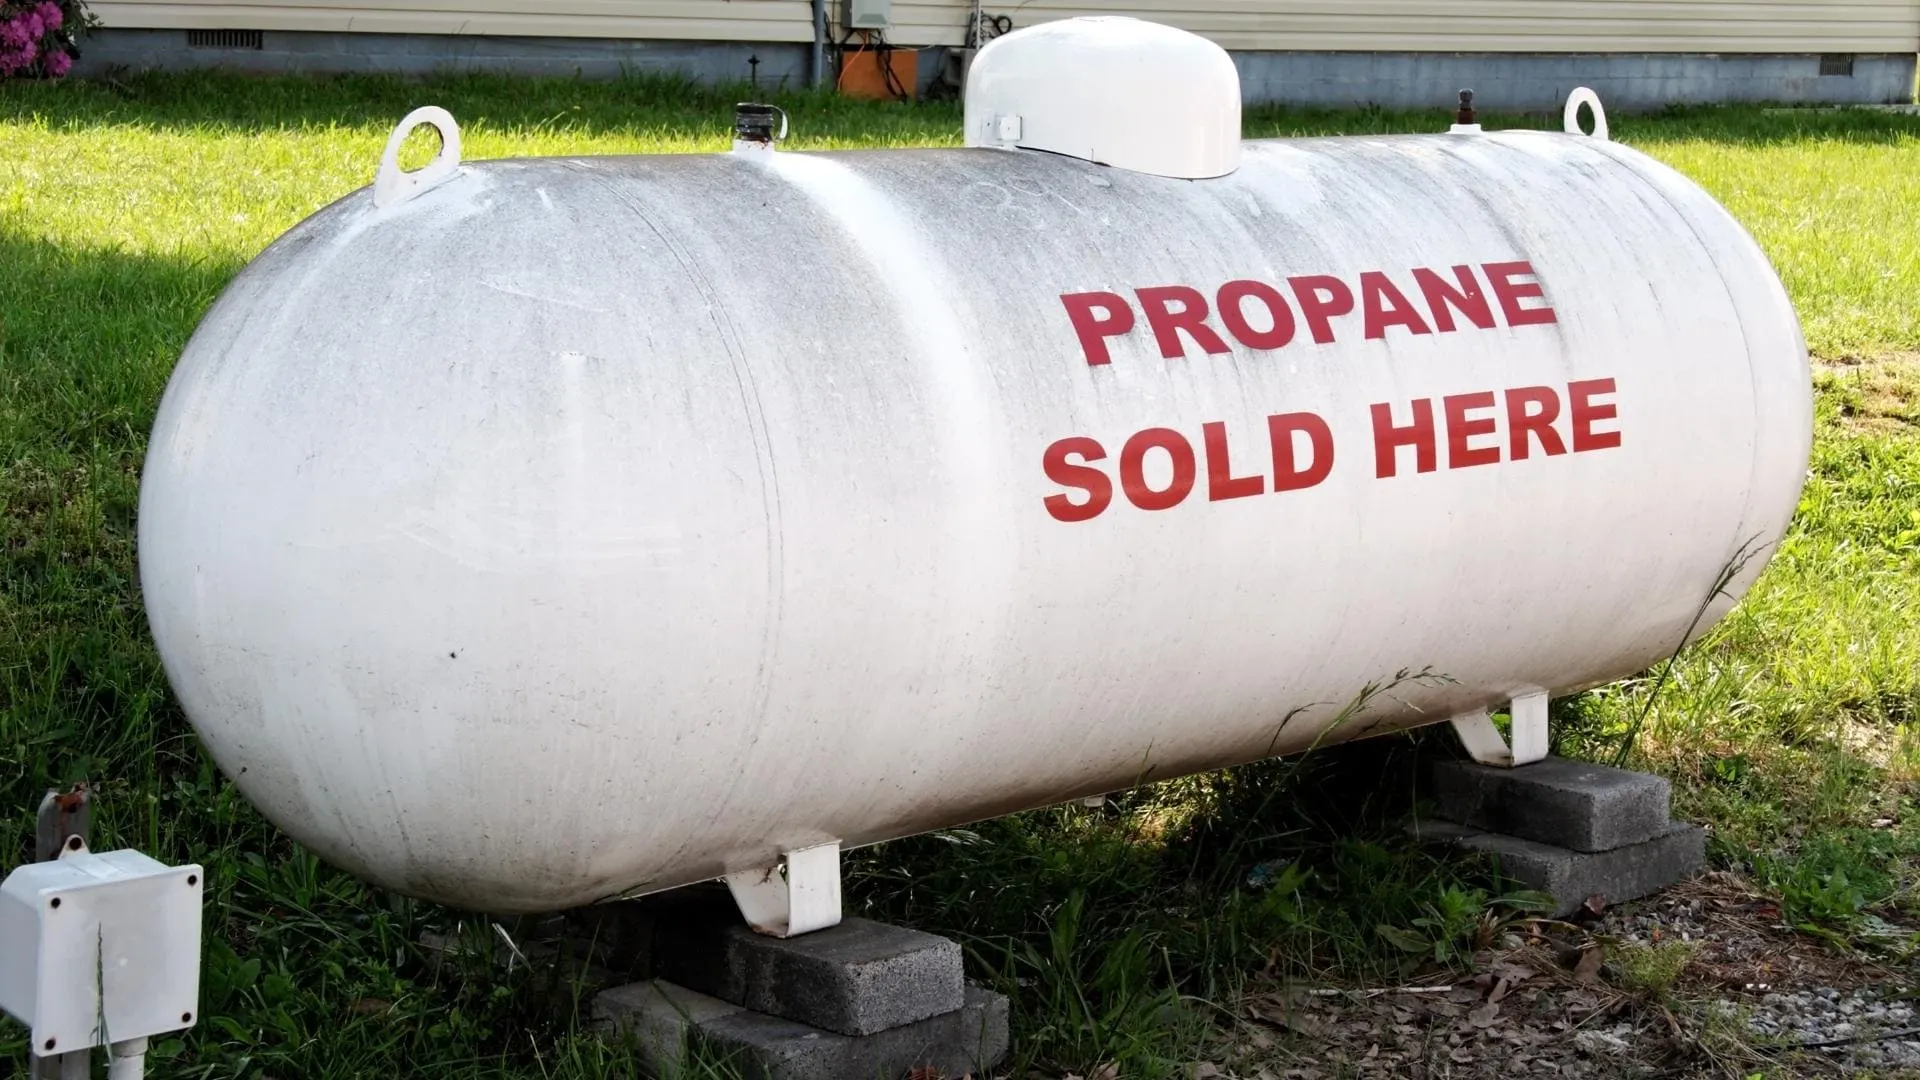 Be sure to refill your propane tank(s) for winter RV living.